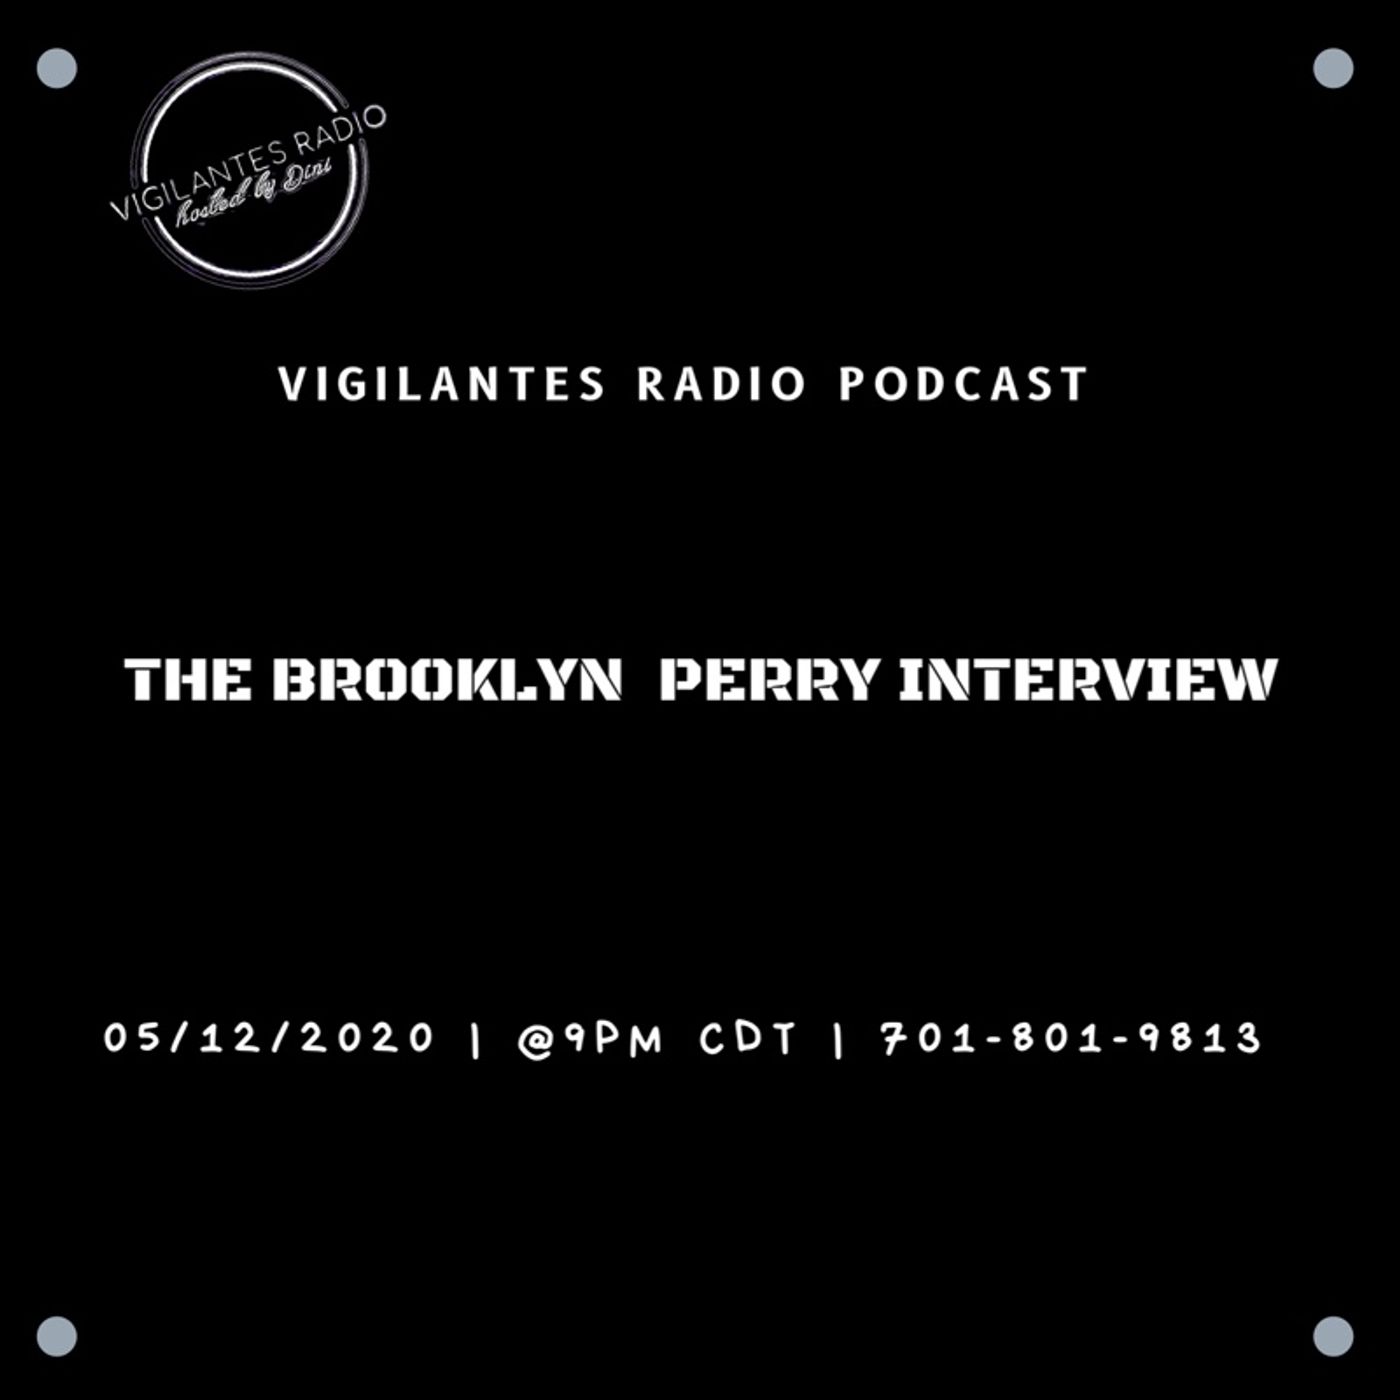 The Brooklyn Perry Interview. Image